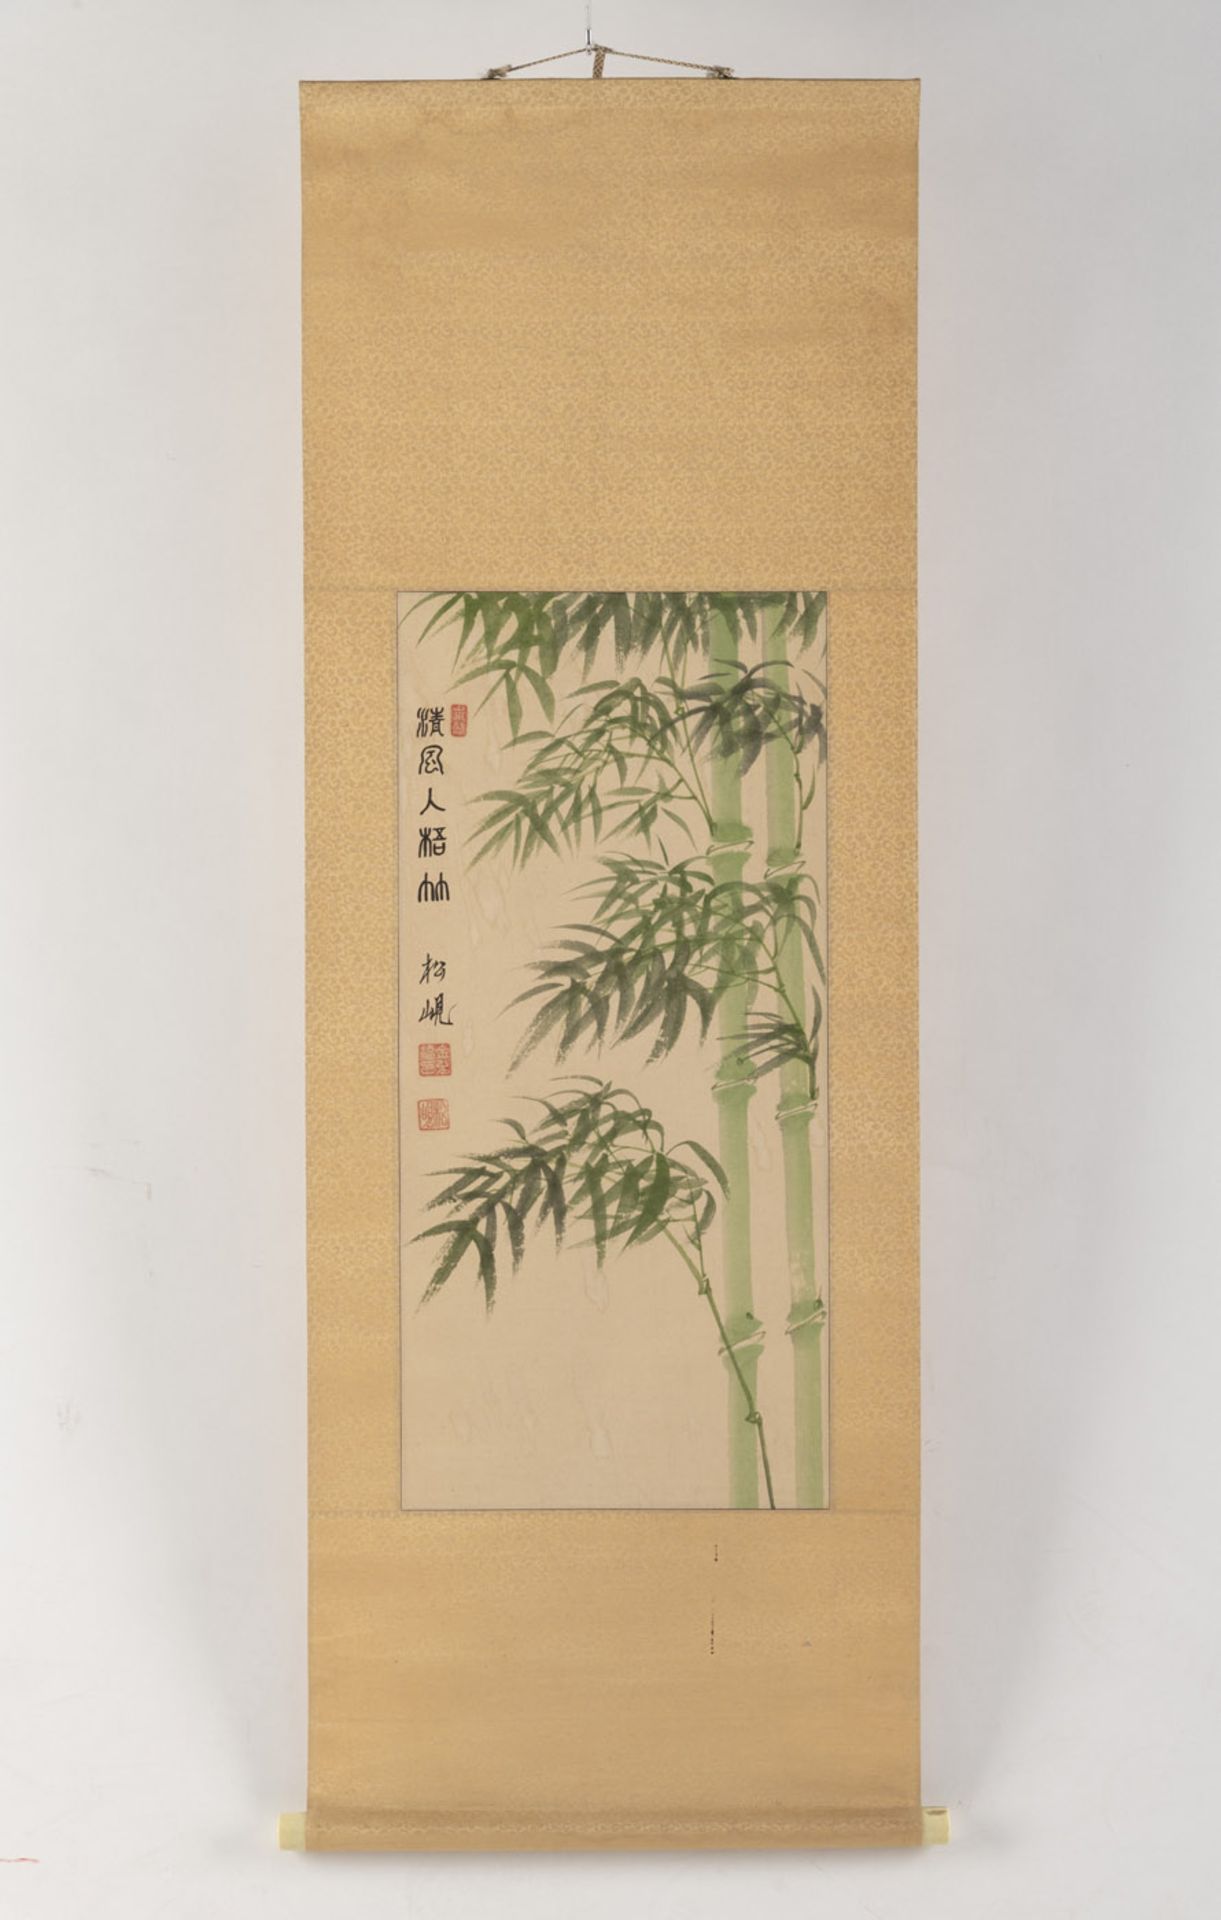 FOUR PAINTINGS DEPICTING THE "FOUR NOBLES": PLUM, ORCHID, BAMBOO AND CHRYSANTHEMUM - Image 10 of 16